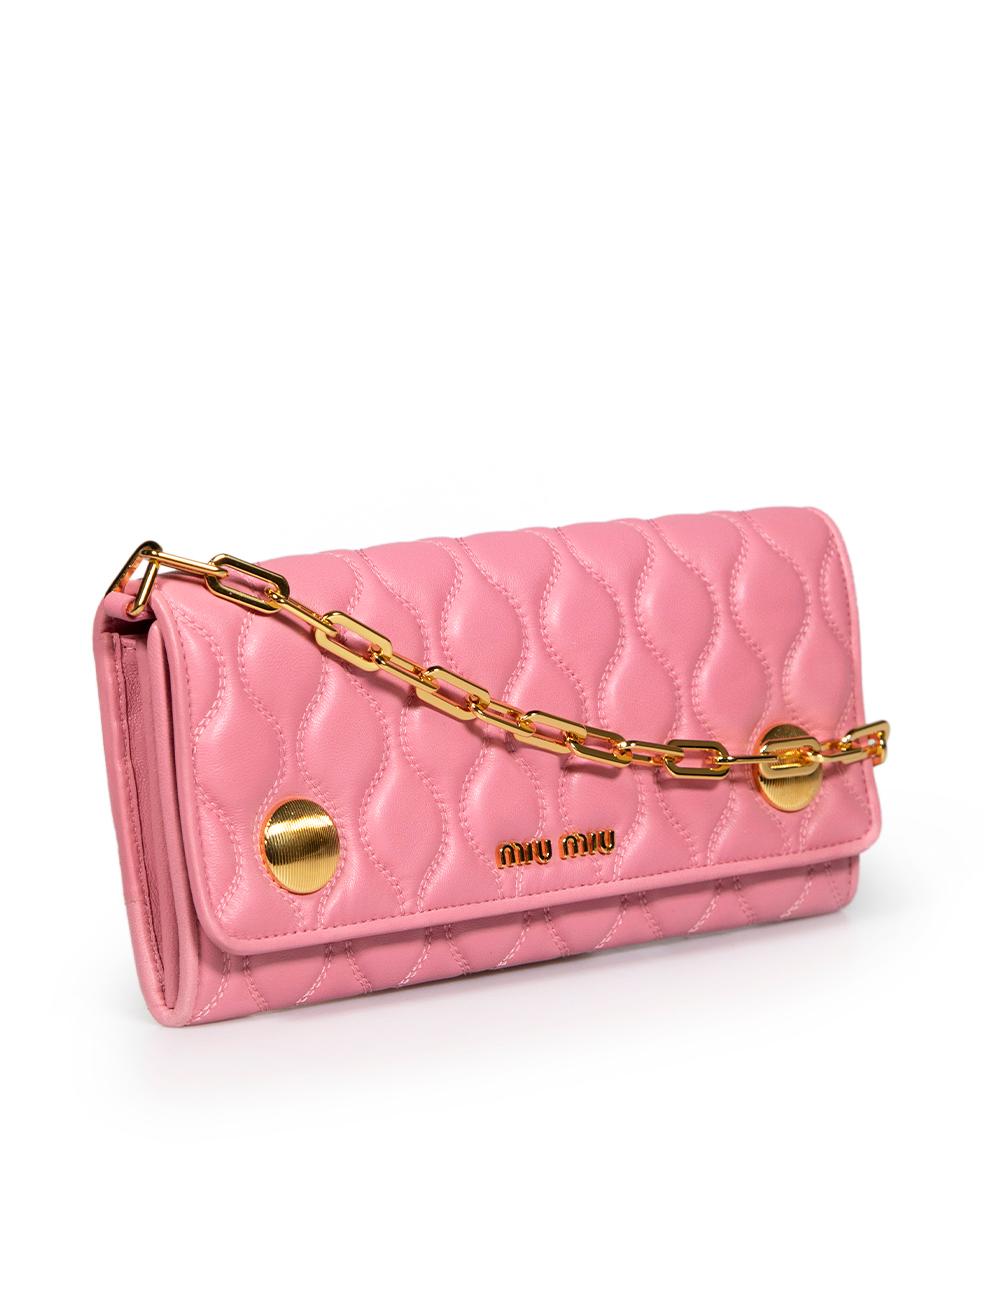 CONDITION is Never worn. No visible wear to bag is evident on this new Miu Miu designer resale item. Comes with original box.
 
 
 
 Details
 
 
 Pink
 
 Leather
 
 Mini crossbody wallet on chain
 
 Quilted
 
 Gold tone hardware
 
 Button and logo